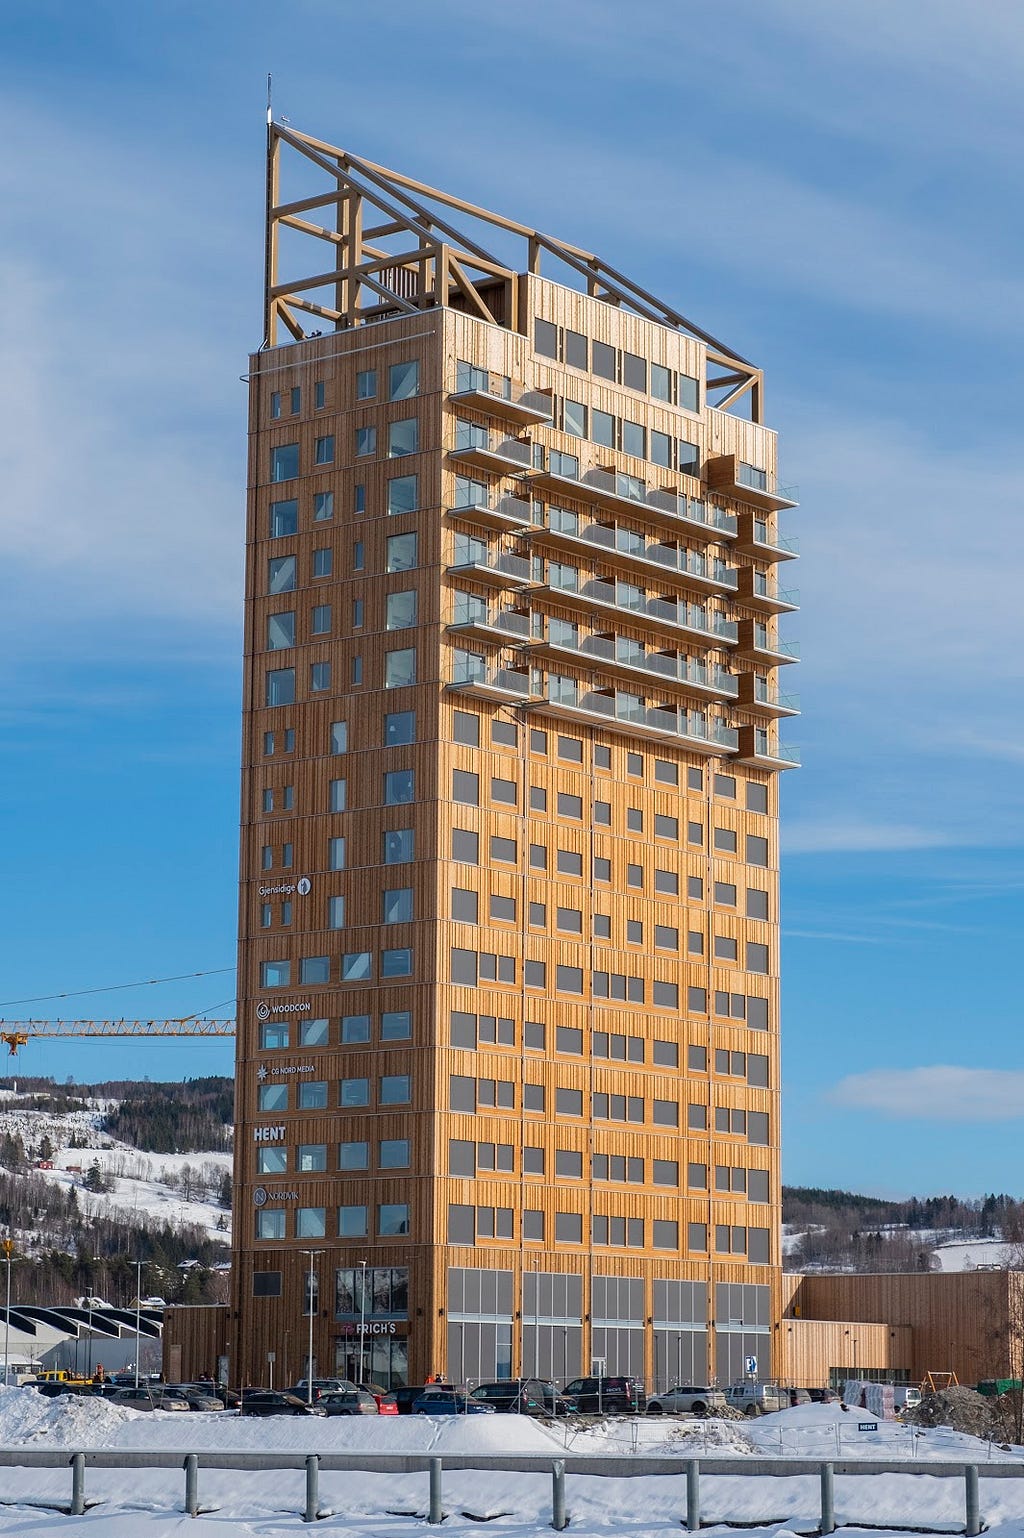 Image of a tall skyscraper made of wood